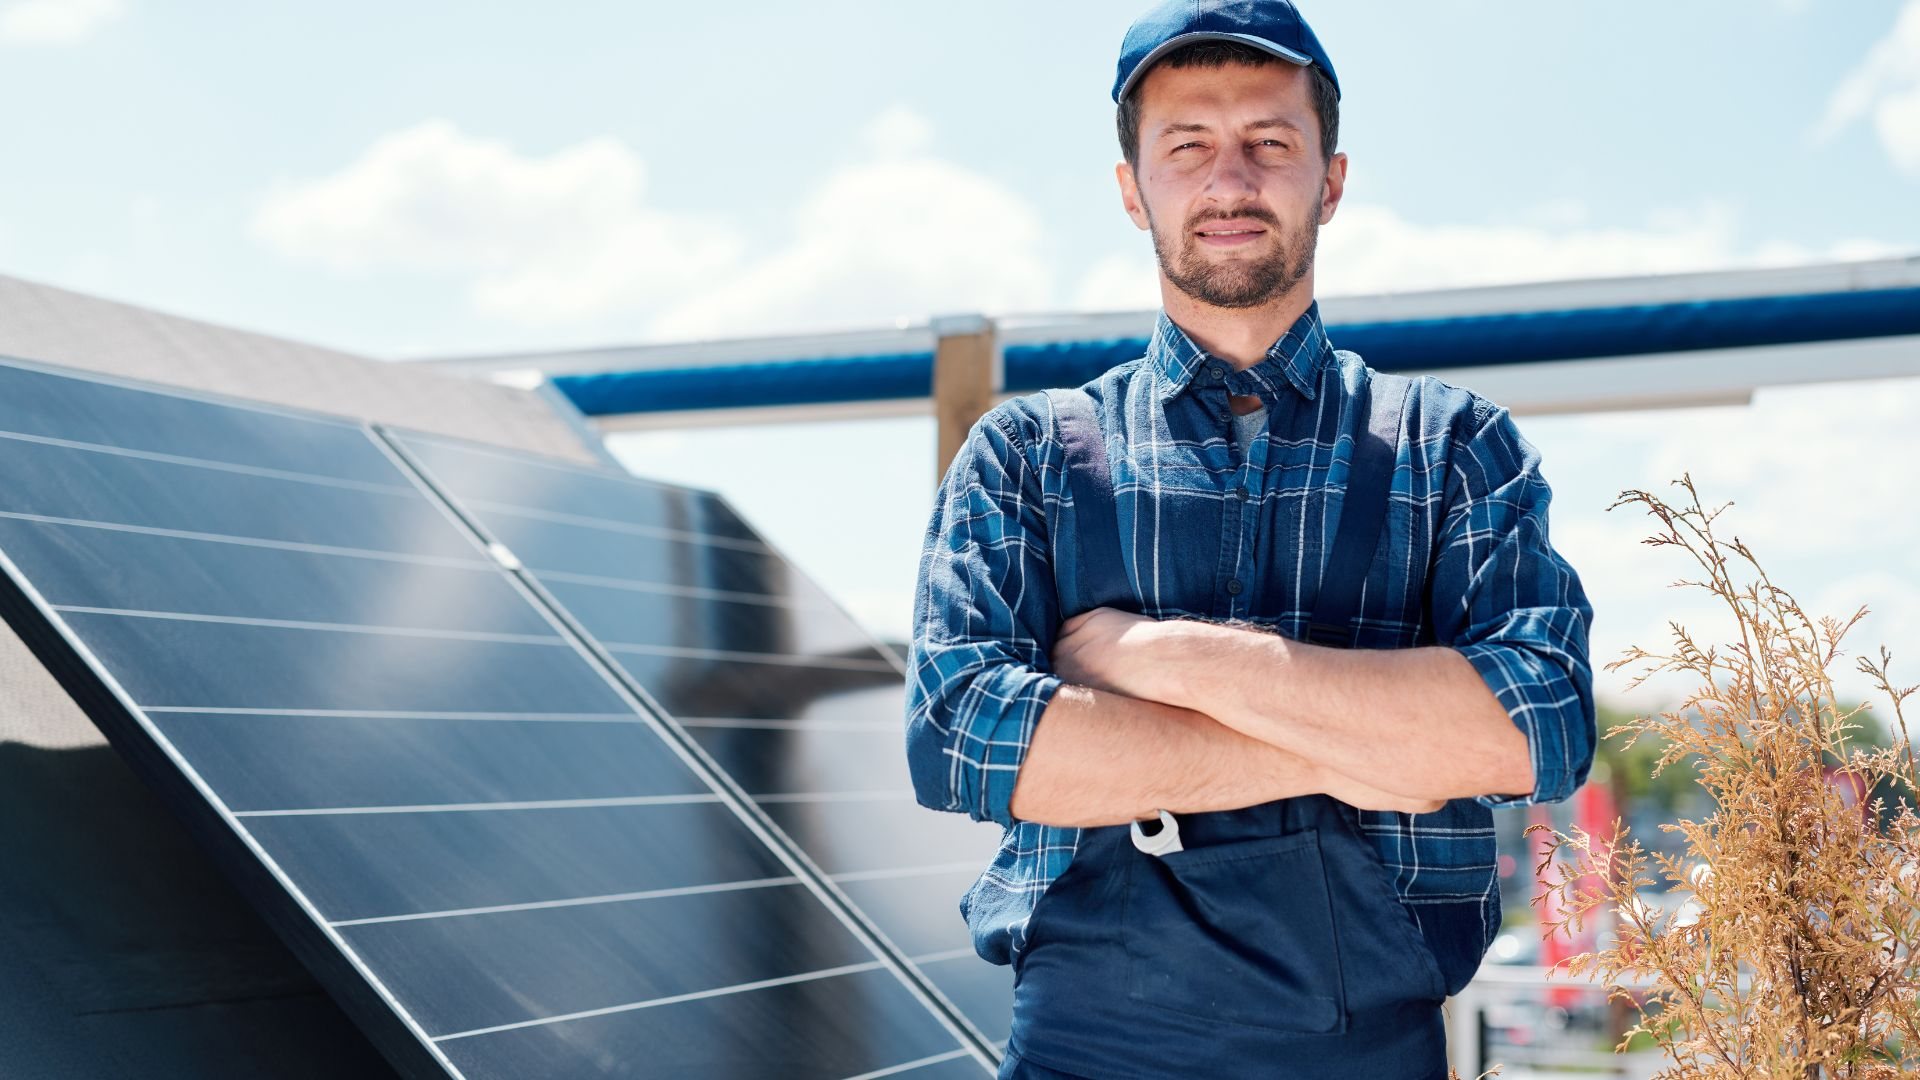 Solar Power, Why You Should Go Solar, Quality First Home Improvement